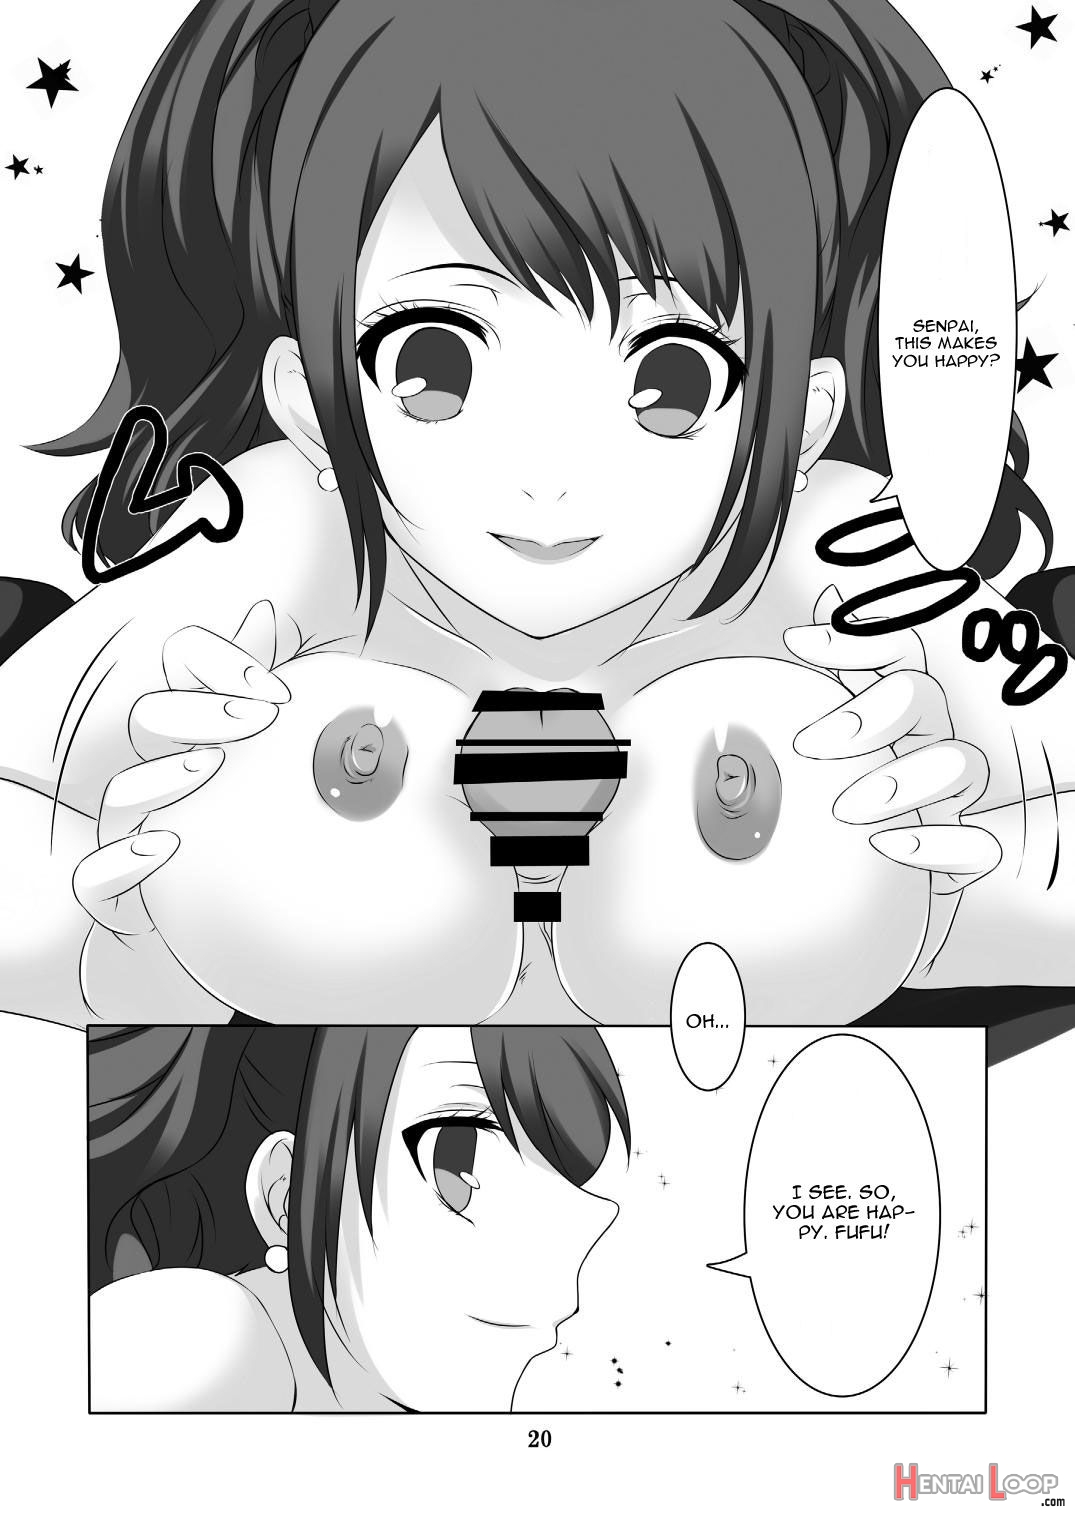 Persona 4 : The Doujin #3 #4 page 21